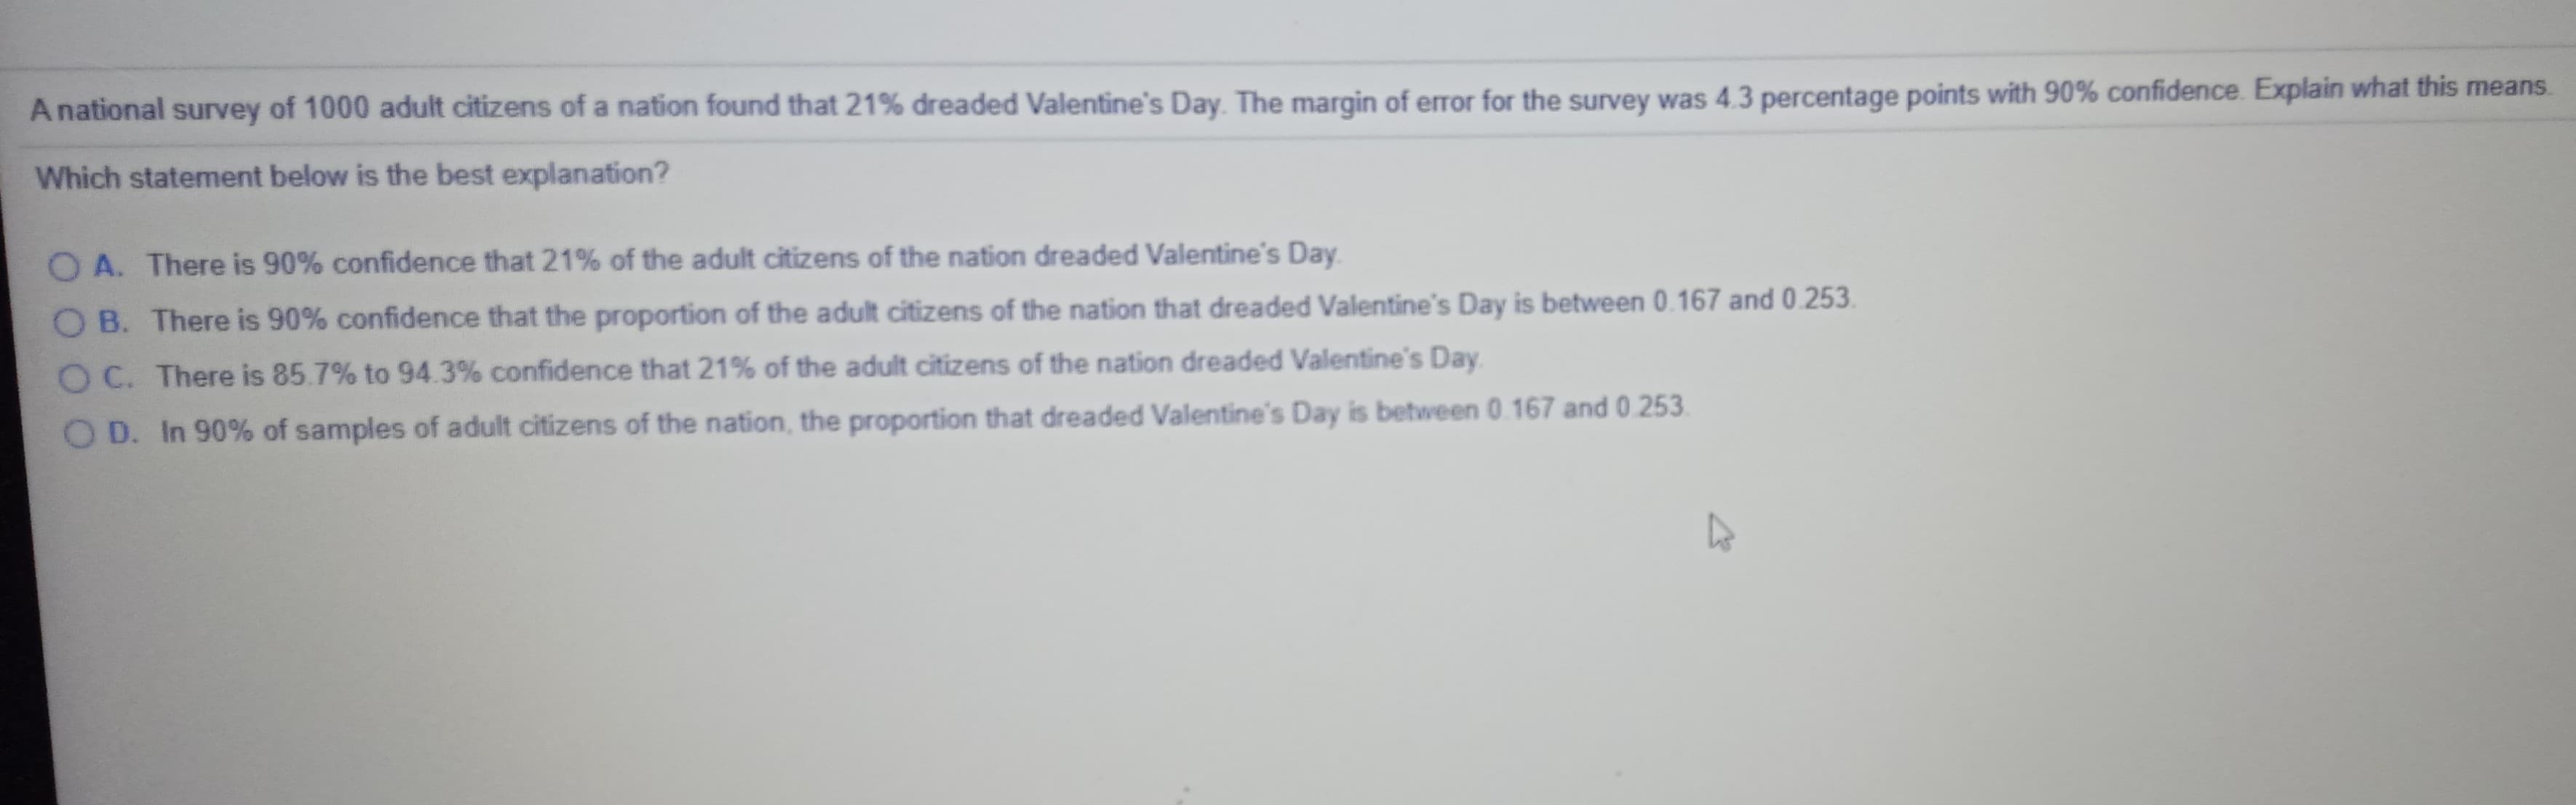 A national survey of 1000 adult citizens of a nation found that 21% dreaded Valentine's Day. The margin of error for the survey was 4.3 percentage points with 90% confidence. Explain what this means.
Which statement below is the best explanation?
O A. There is 90% confidence that 21% of the adult citizens of the nation dreaded Valentine's Day.
O B. There is 90% confidence that the proportion of the adult citizens of the nation that dreaded Valentine's Day is between 0.167 and 0.253.
O C. There is 85.7% to 94.3% confidence that 21% of the adult citizens of the nation dreaded Valentine's Day.
D. In 90% of samples of adult citizens of the nation, the proportion that dreaded Valentine's Day is between 0.167 and 0.253.
